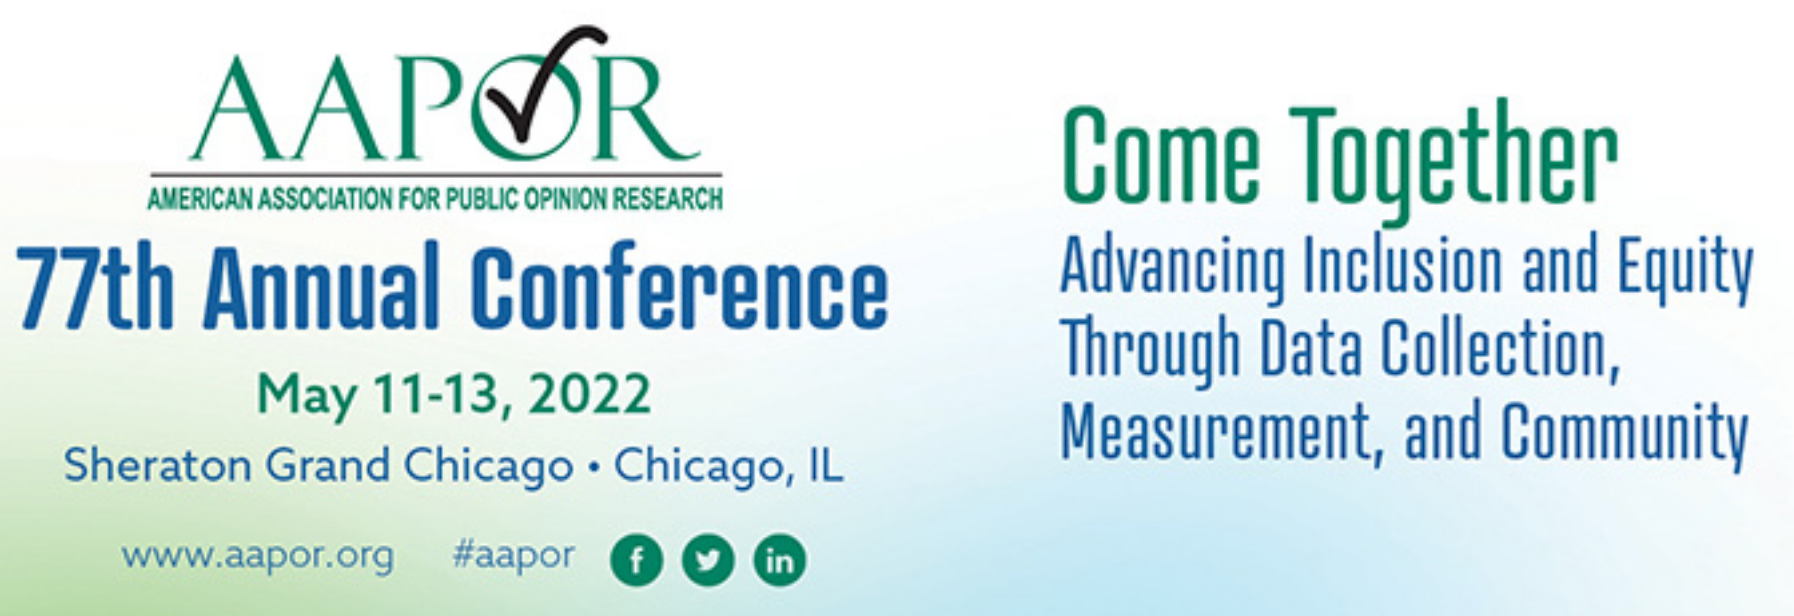 AAPOR 2022 Annual Conference